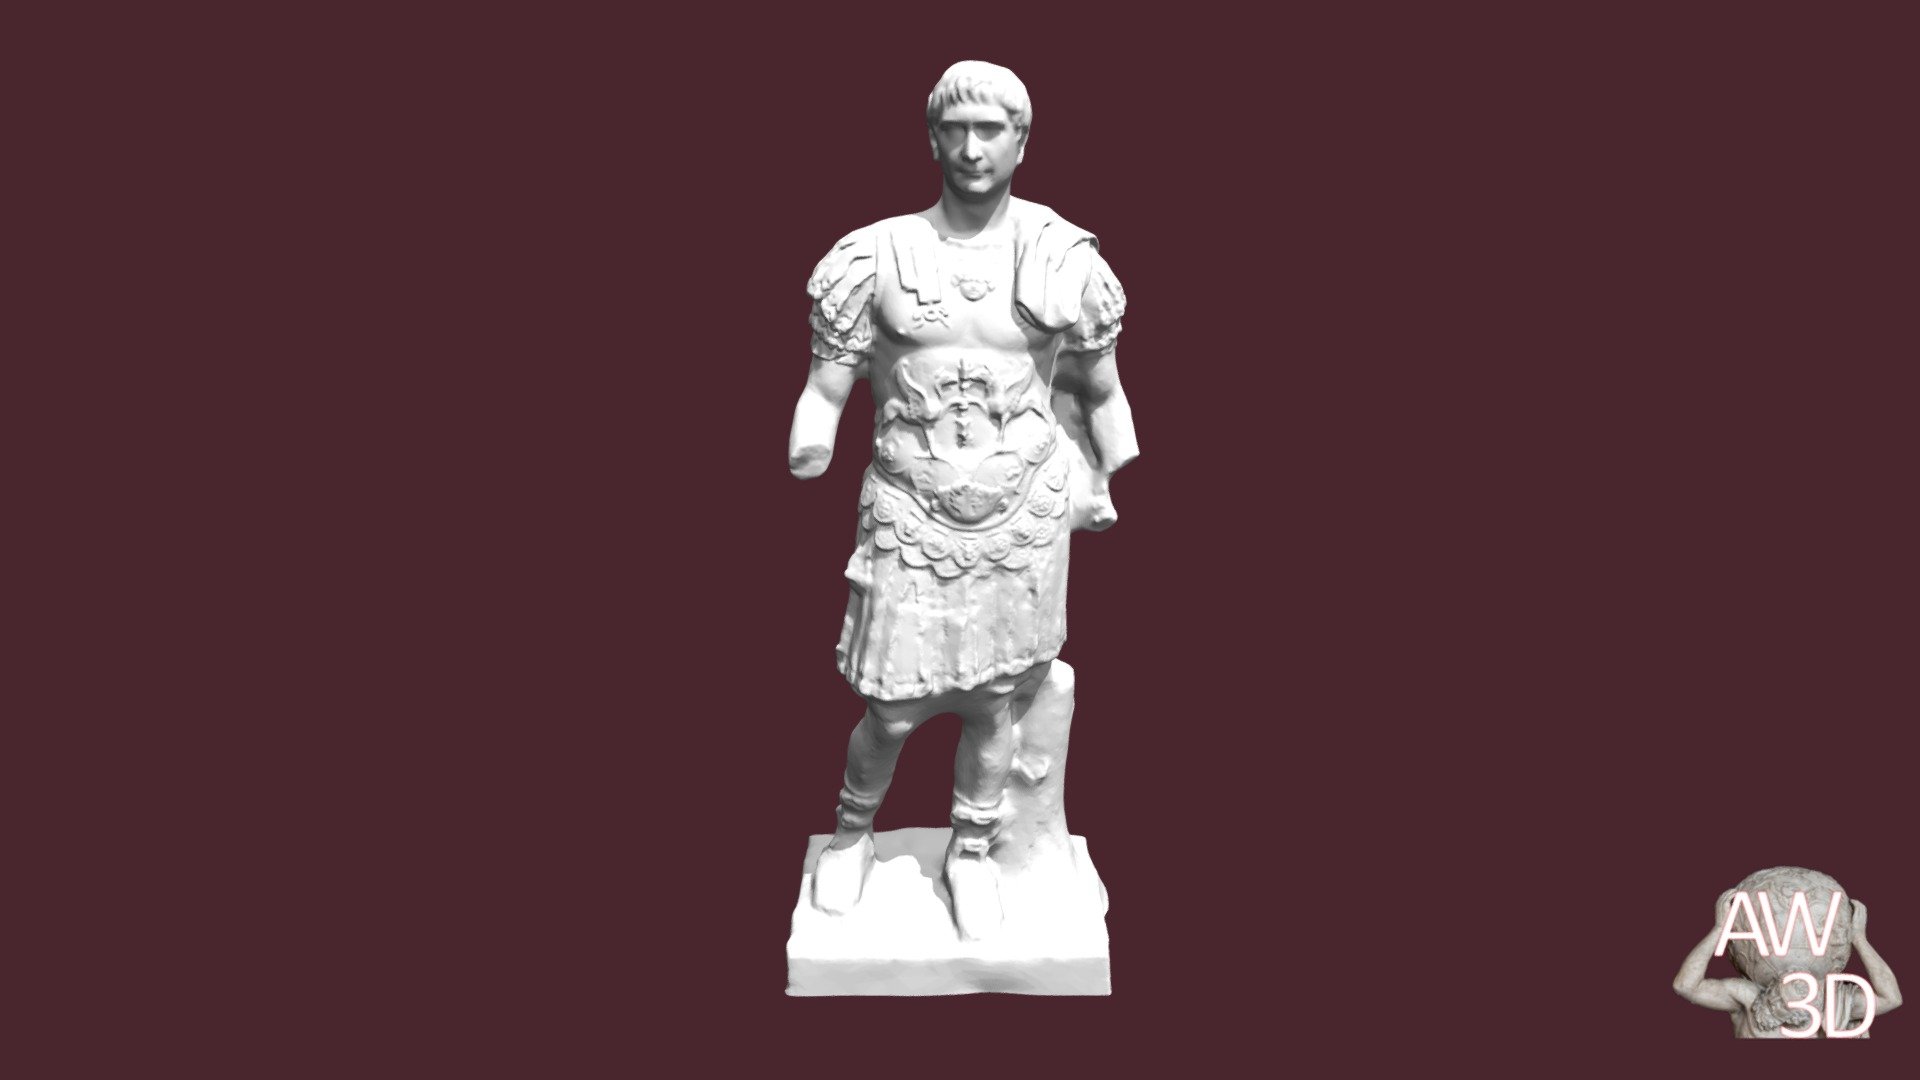 This is a 3D model of an ancient marble statue in the Glyptotek Museum in København, Denmark. It is a sculpture of the Roman emperor Trajan. The statue depicts Trajan in a standing position with pieces of both arms missing from the statue. Trajan ruled Rome from 98 to 117 CE. He was seen as a very benevolent ruler and was most known for projects that benefited the Roman society. Such projects include constructing aqueducts and building public baths. 

Bibliography: AncientRome.ru; Ancient History Encyclopedia: Trajan

Ancient World 3D
This model posting is part of Ancient World 3D, a project that provides curated 3D open access content for Classical Studies. Each model has an etched catalog# and 3D Printable frame for building a library. The original model was posted by 3DWP. This entry was composed by Chloe Antonio and Ryan Knapp (Dr. Elizabeth Thill, advisor) 3d model